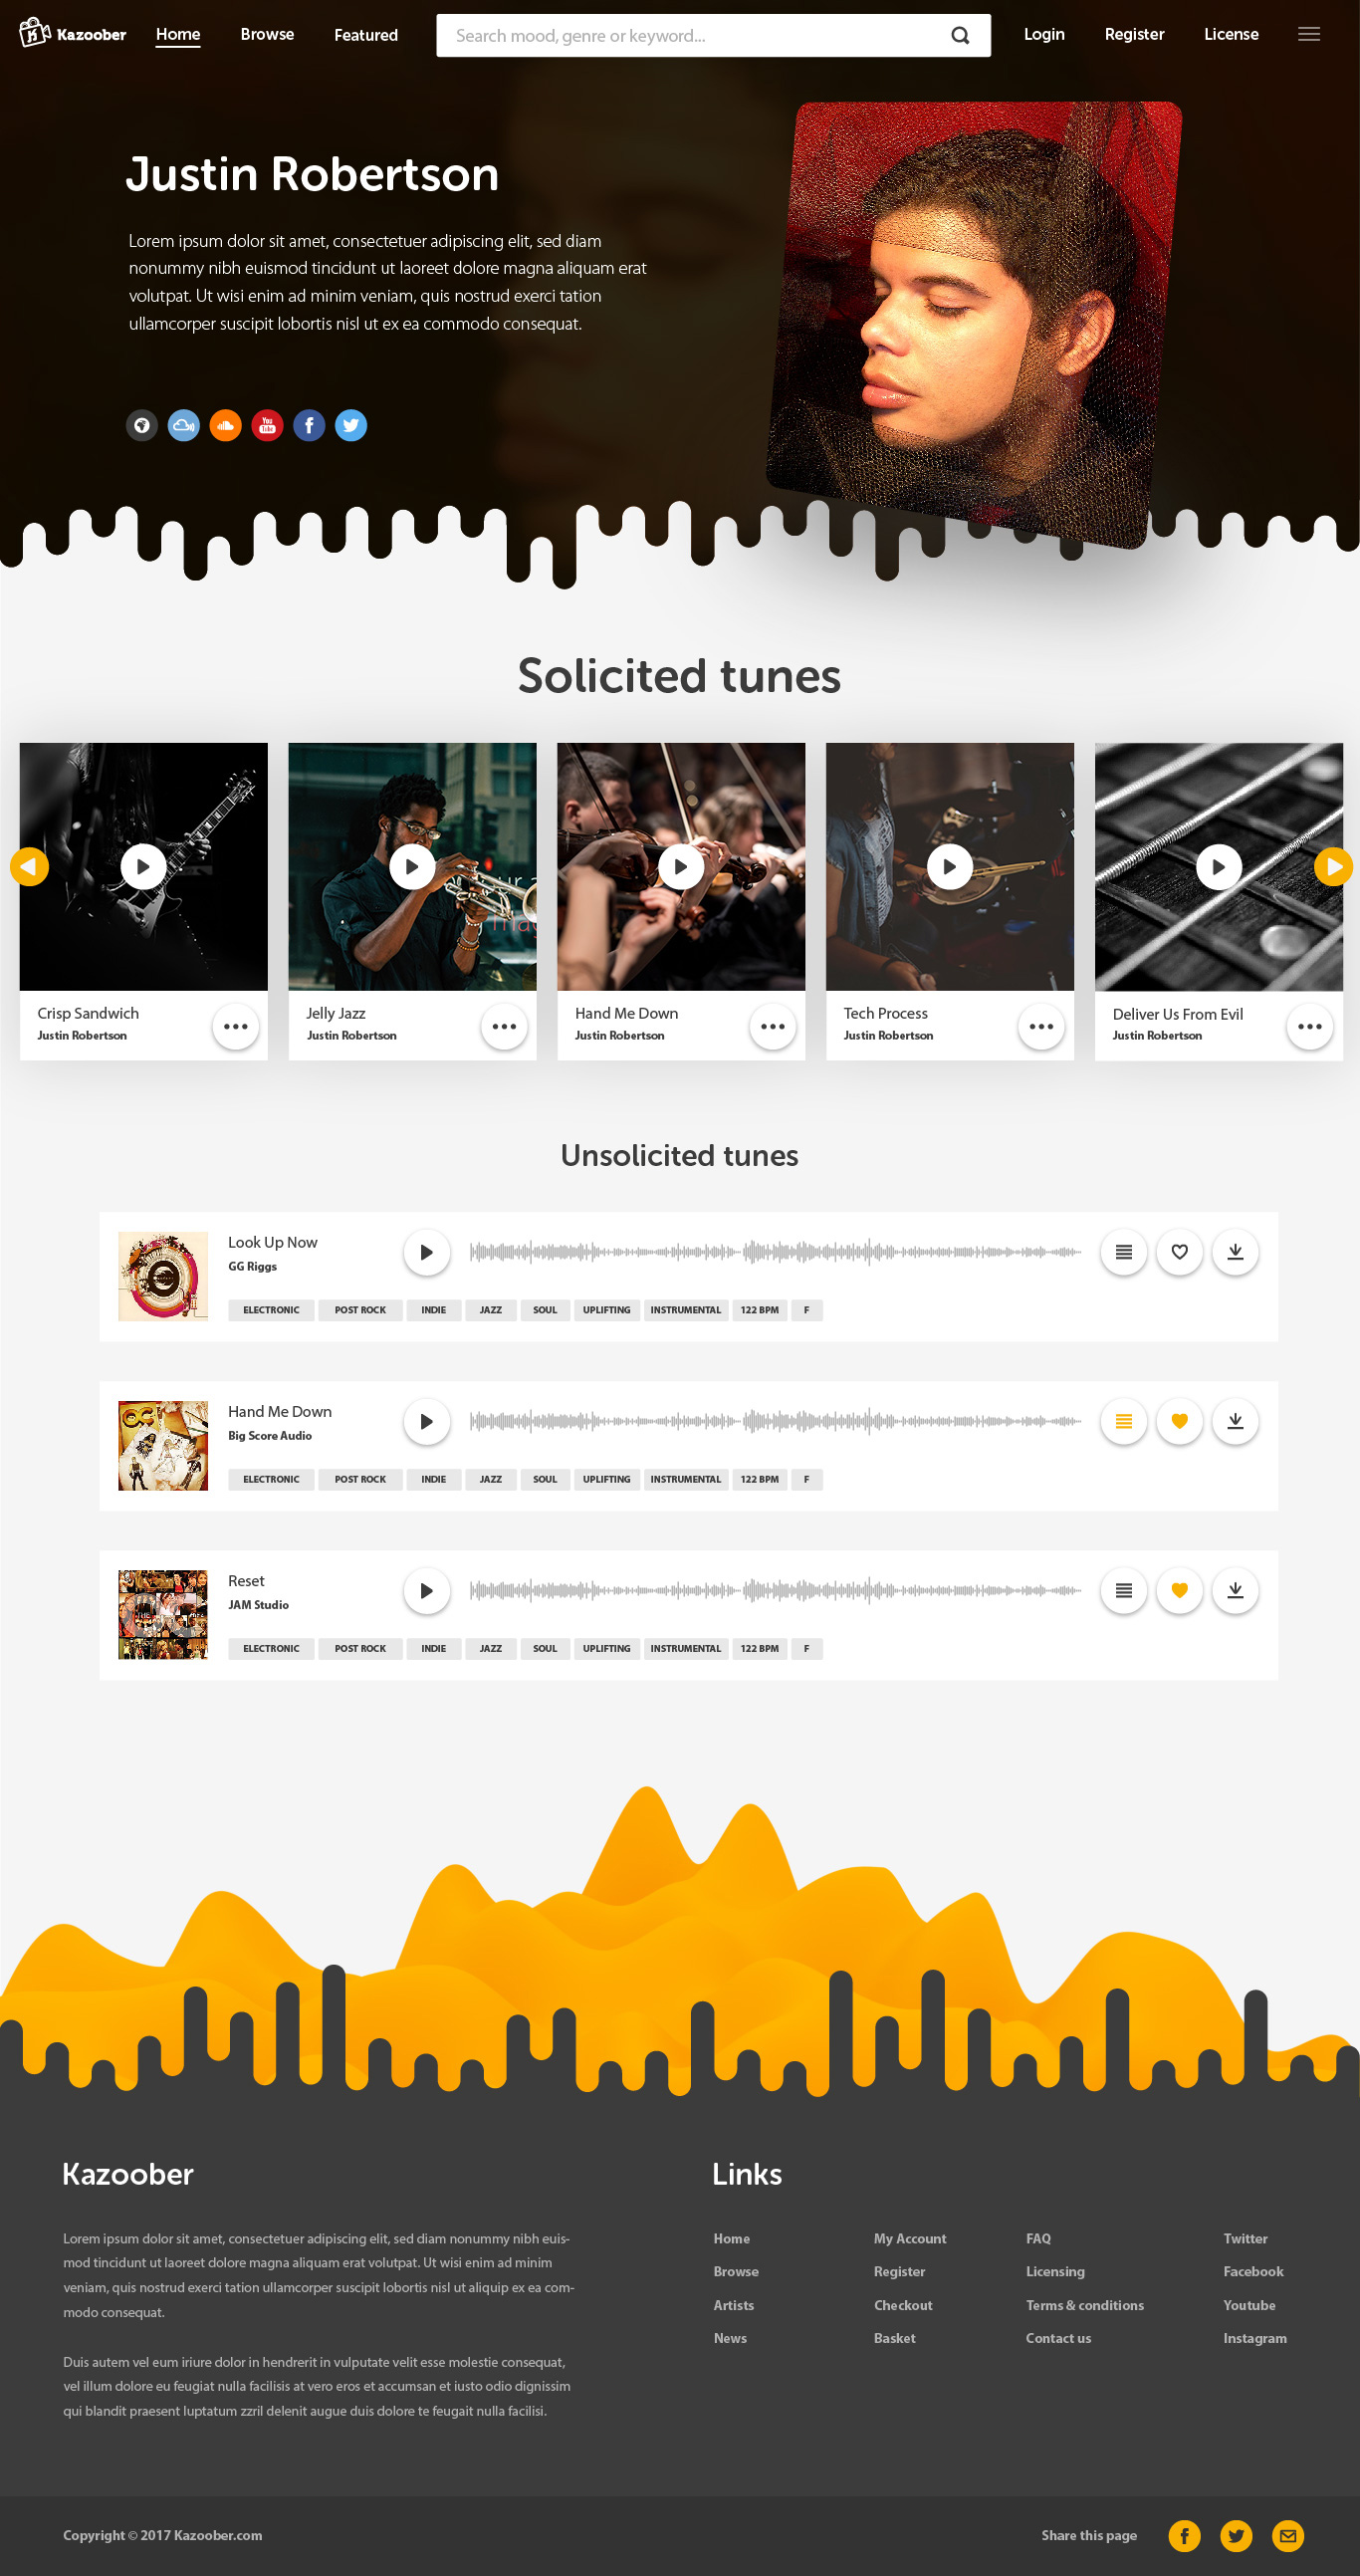 Product page showing artist profile